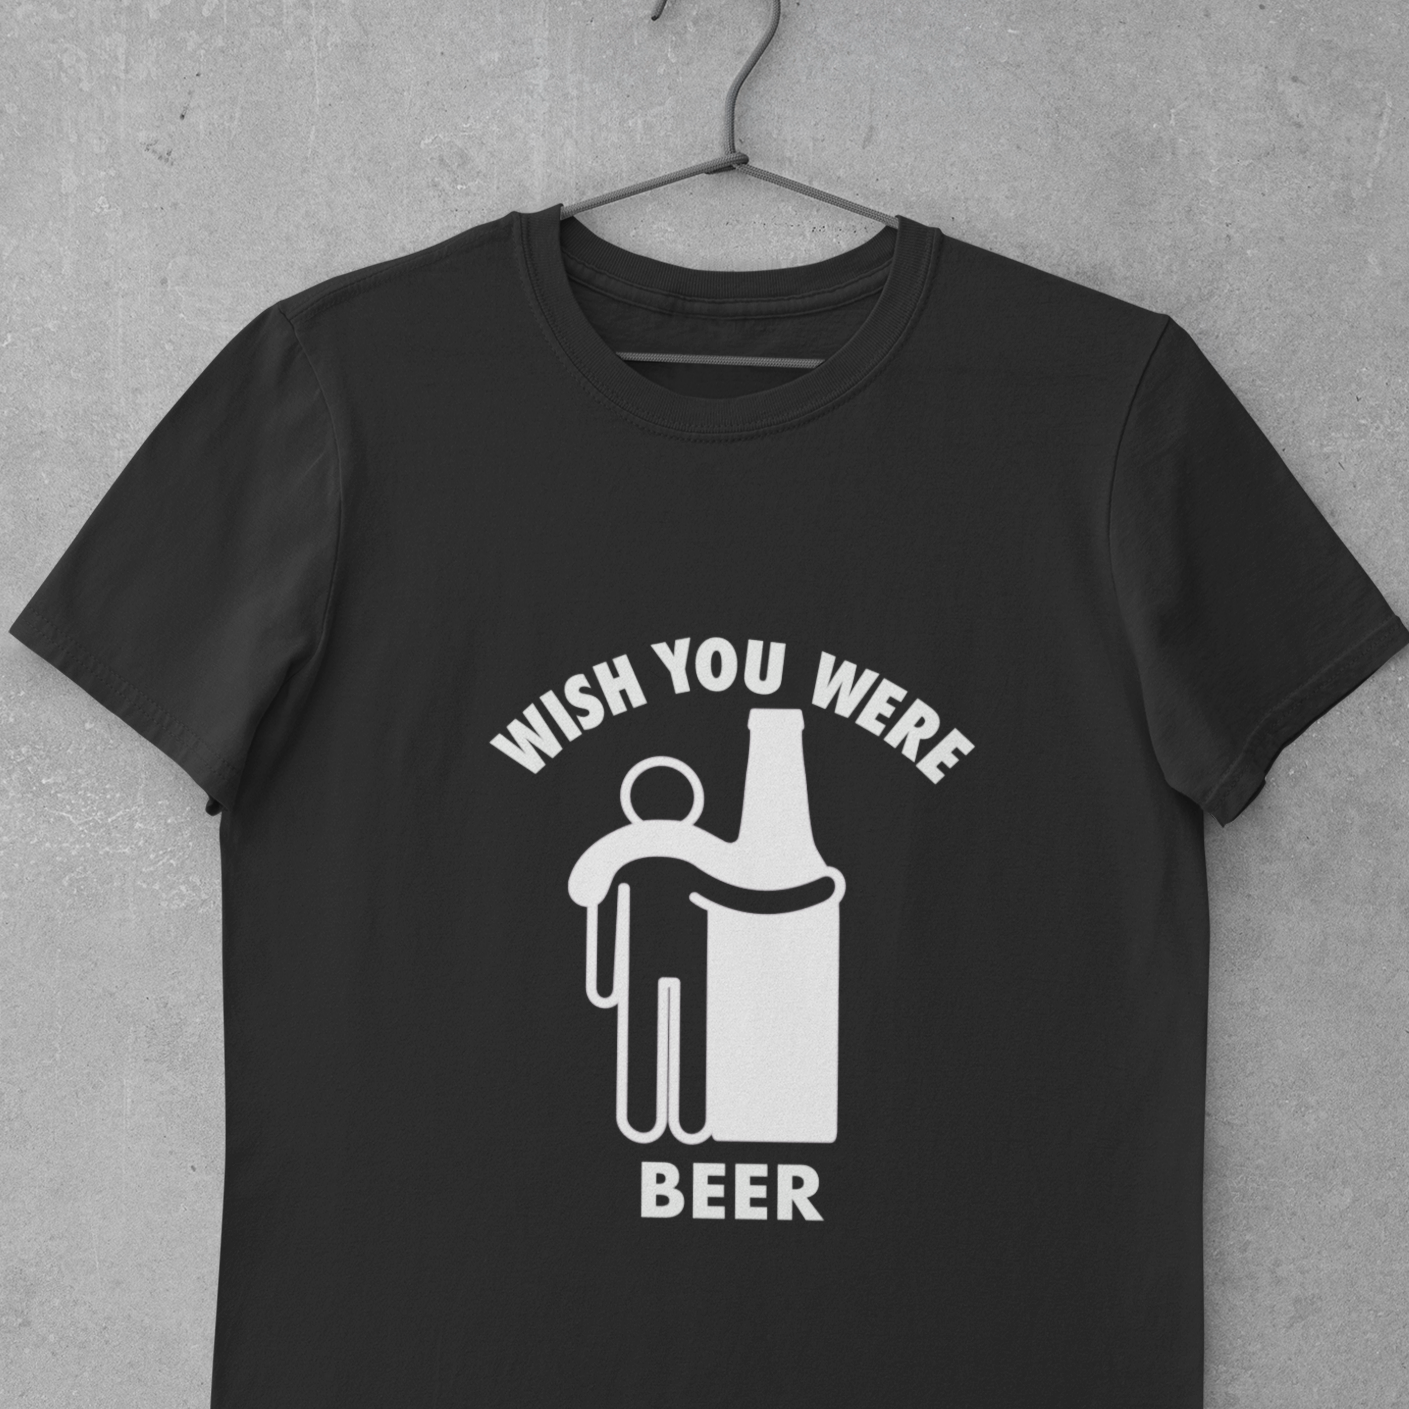 Wish You Were Beer - MH